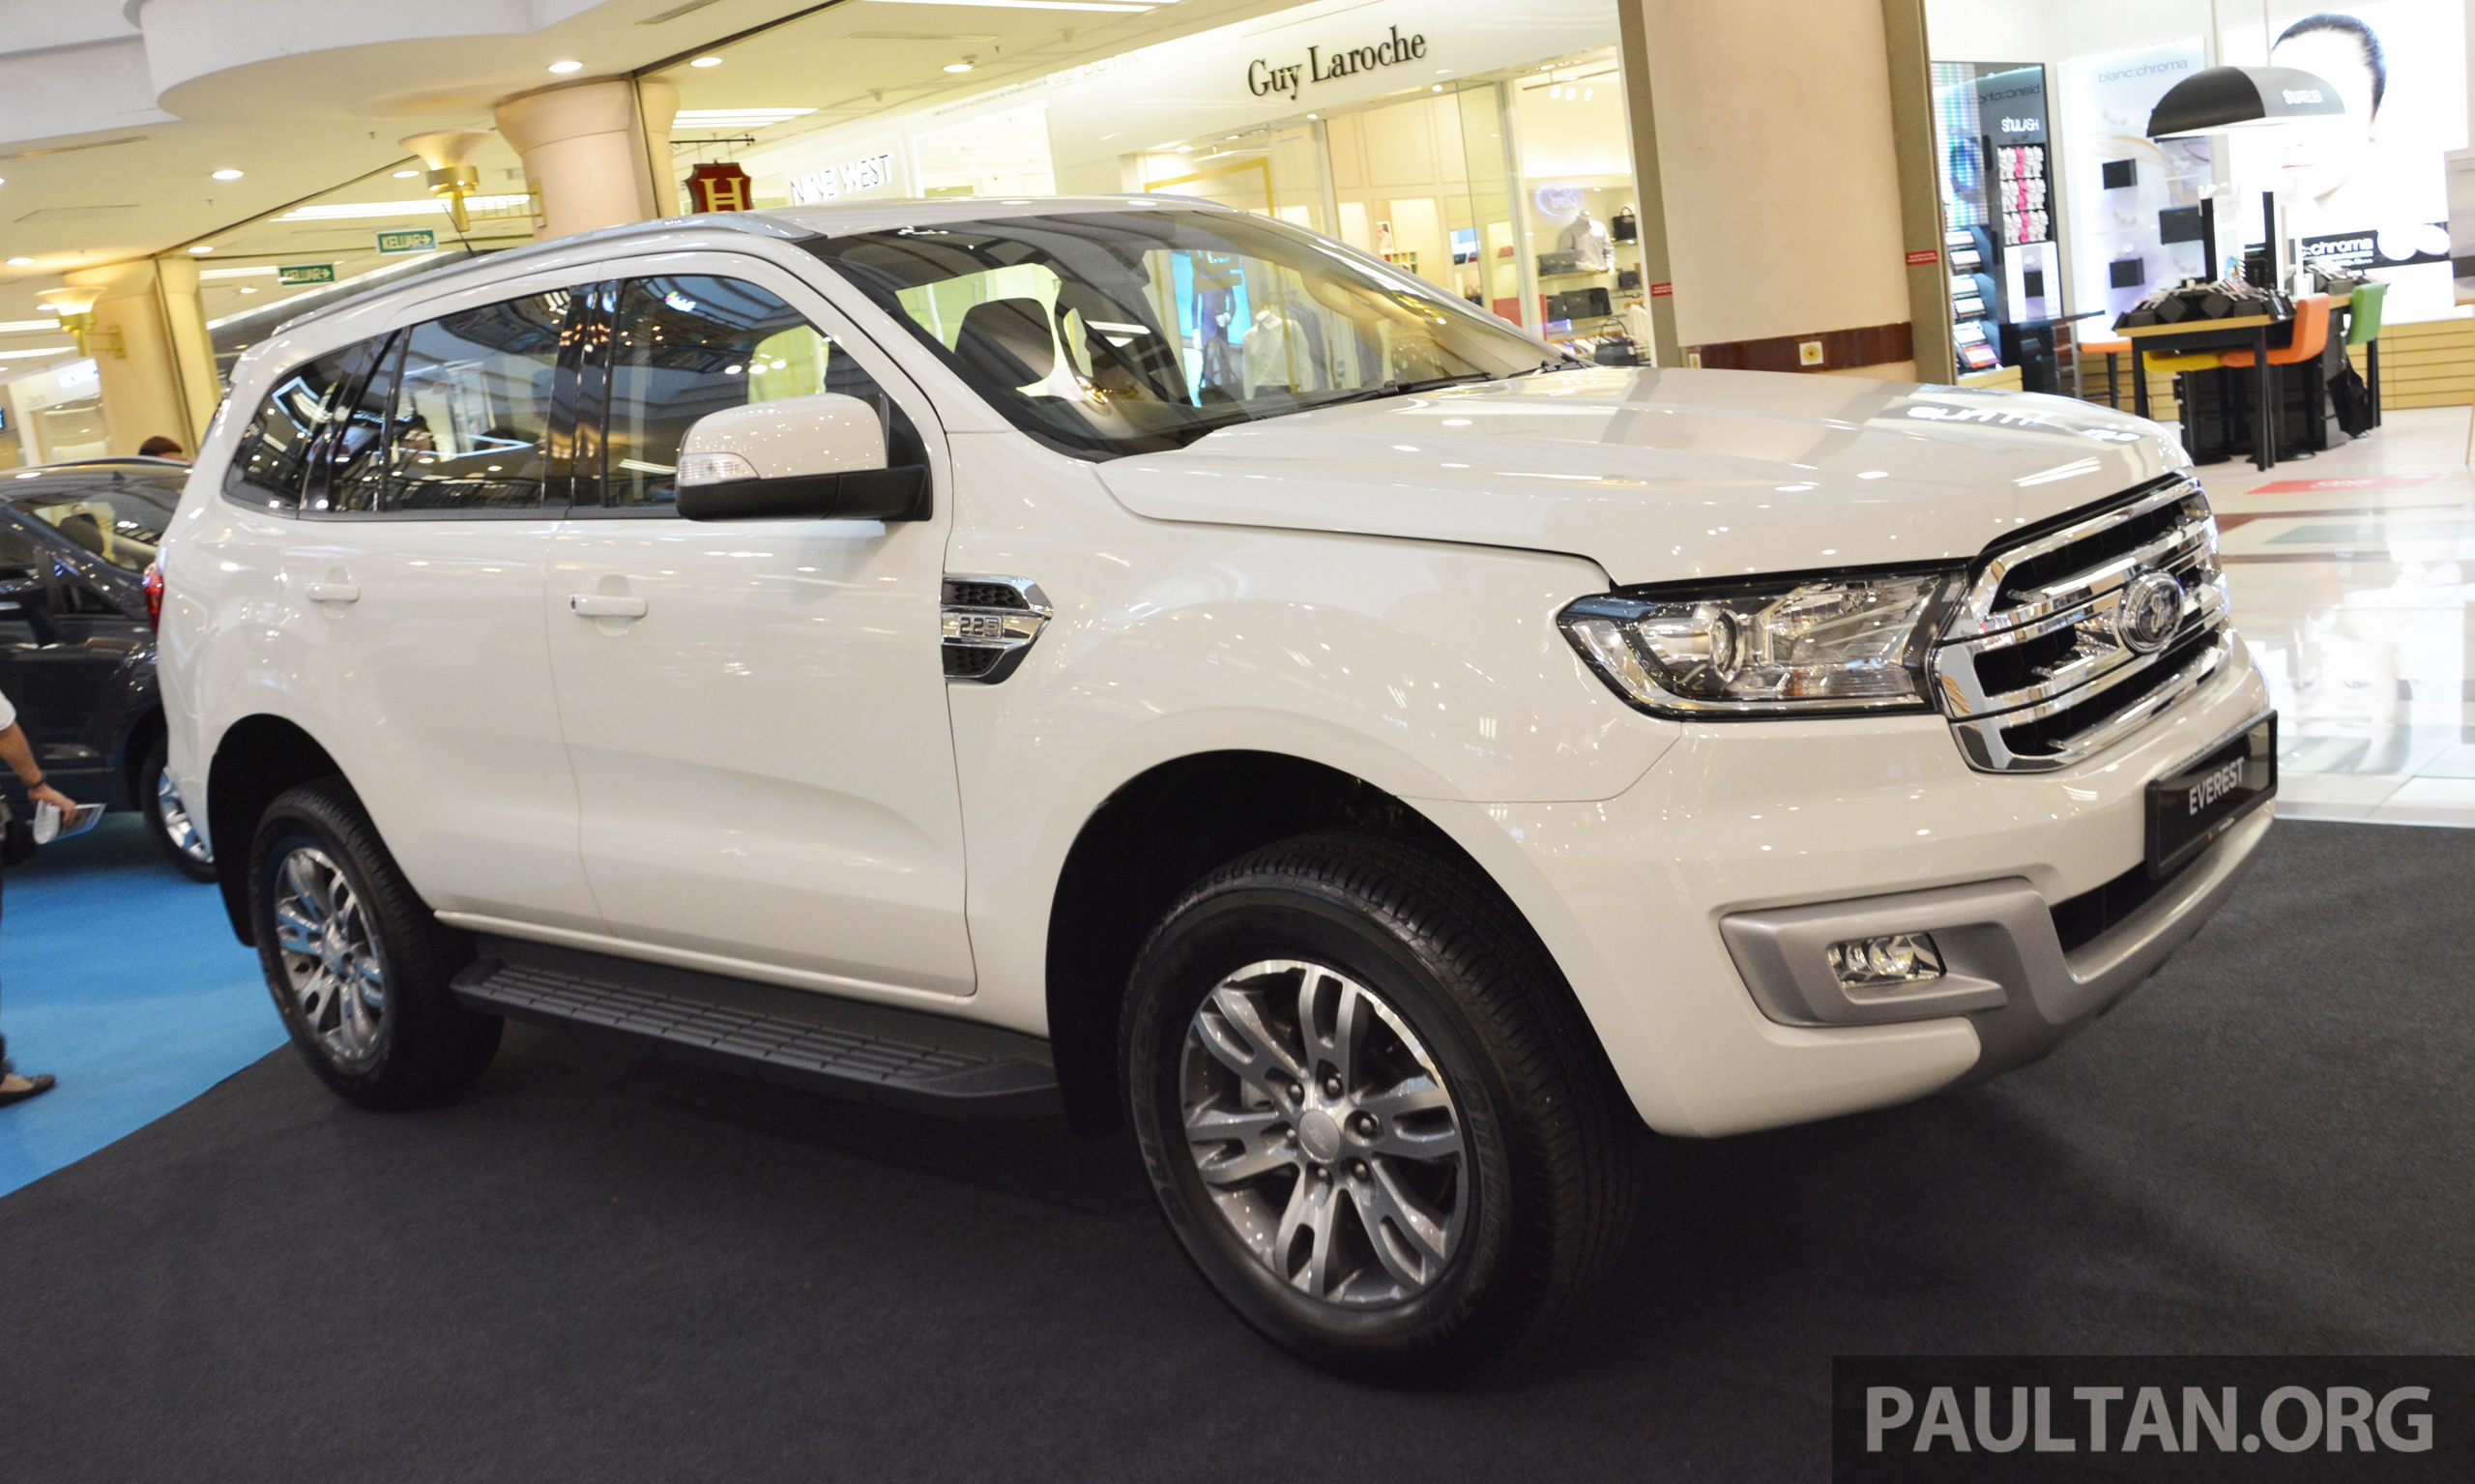 2016 Ford Everest - 2.2L Trend 4×2 and 3.2L Titanium 4×4 on preview at ...